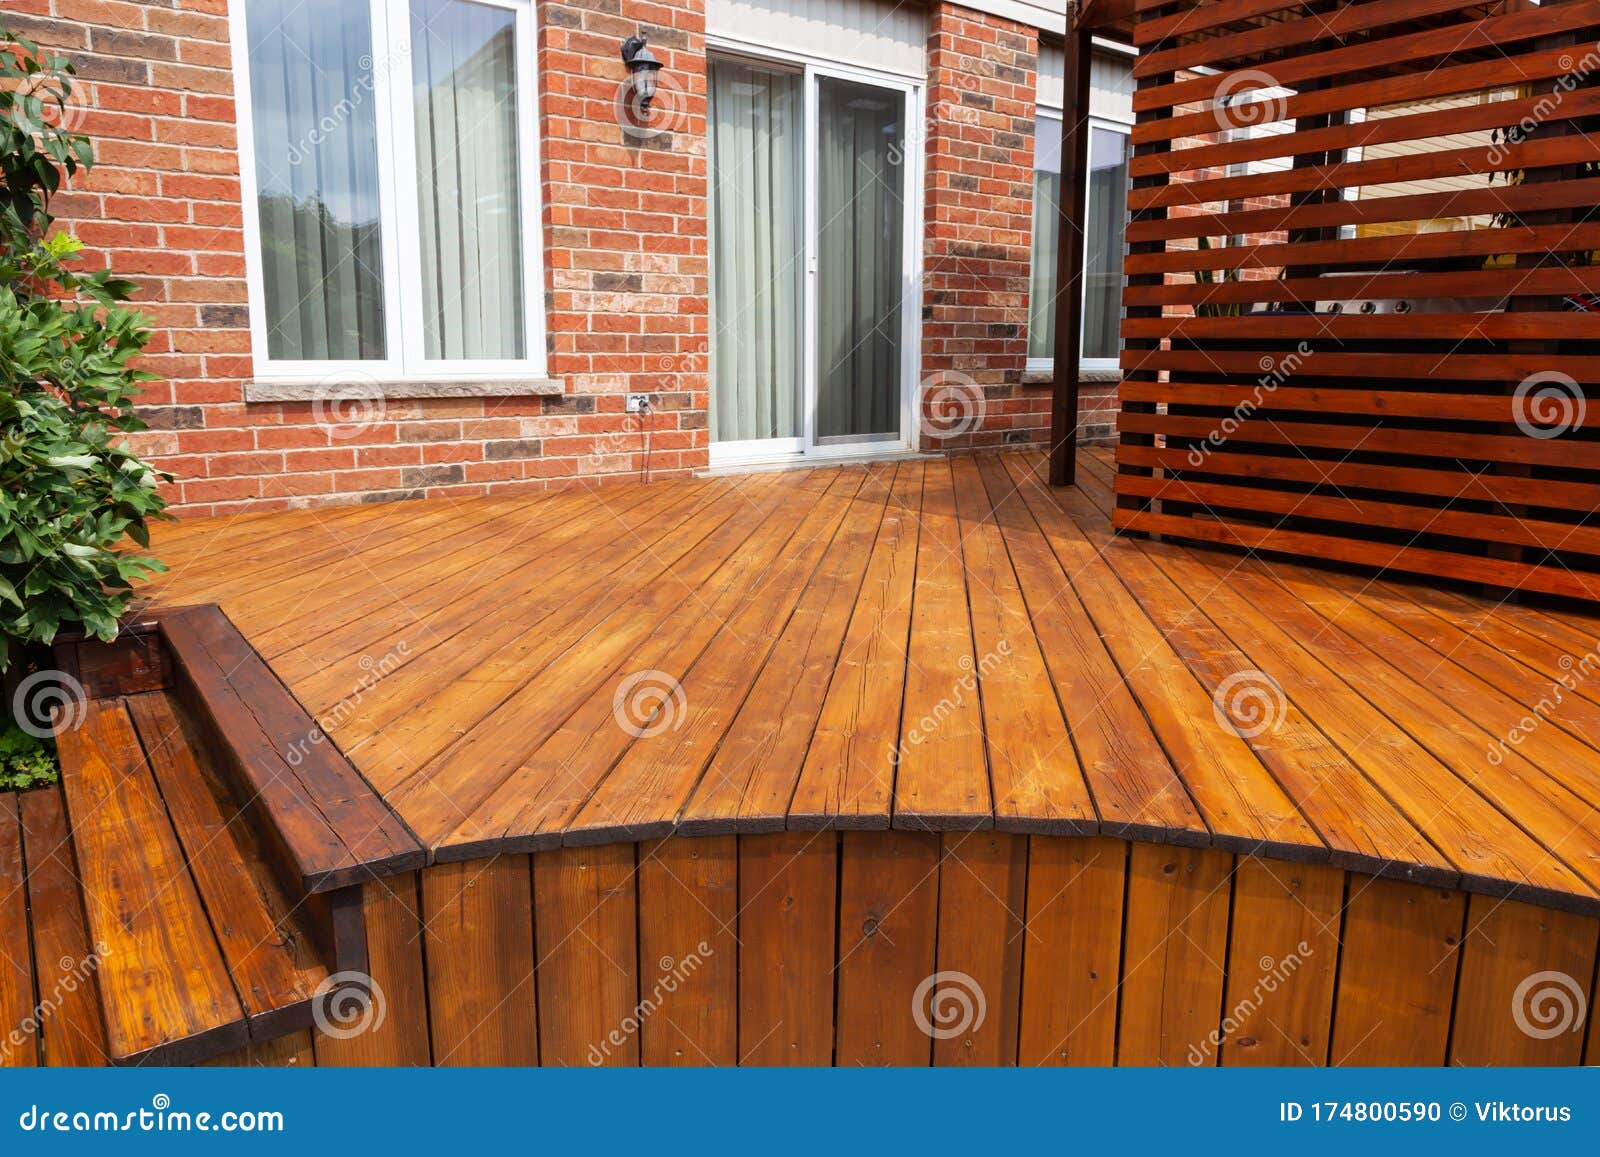 backyard wooden deck floor boards with fresh brown stain